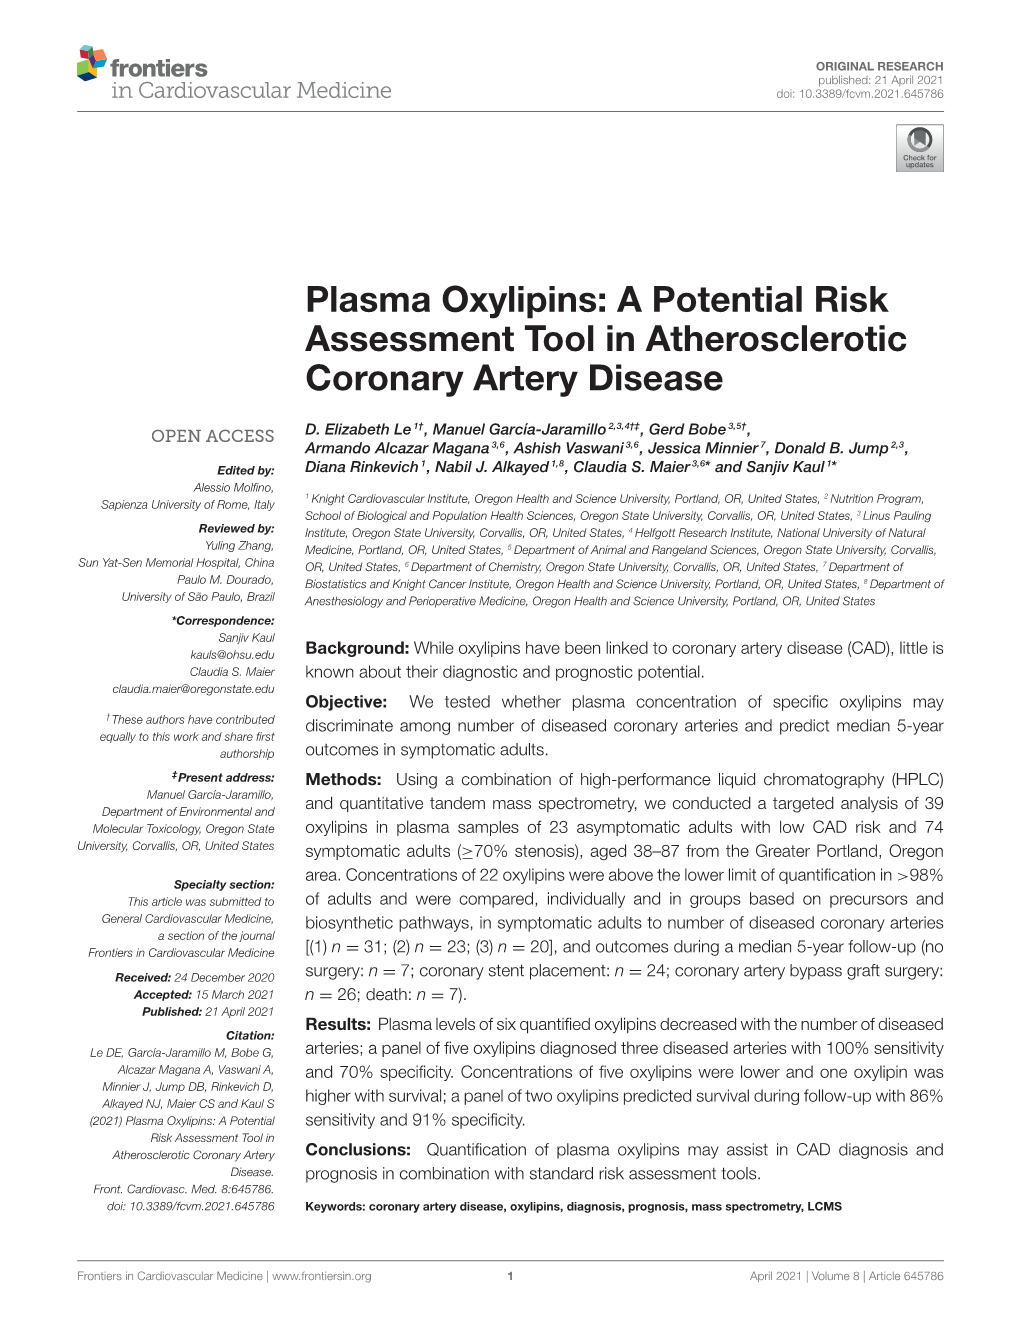 Plasma Oxylipins: a Potential Risk Assessment Tool in Atherosclerotic Coronary Artery Disease